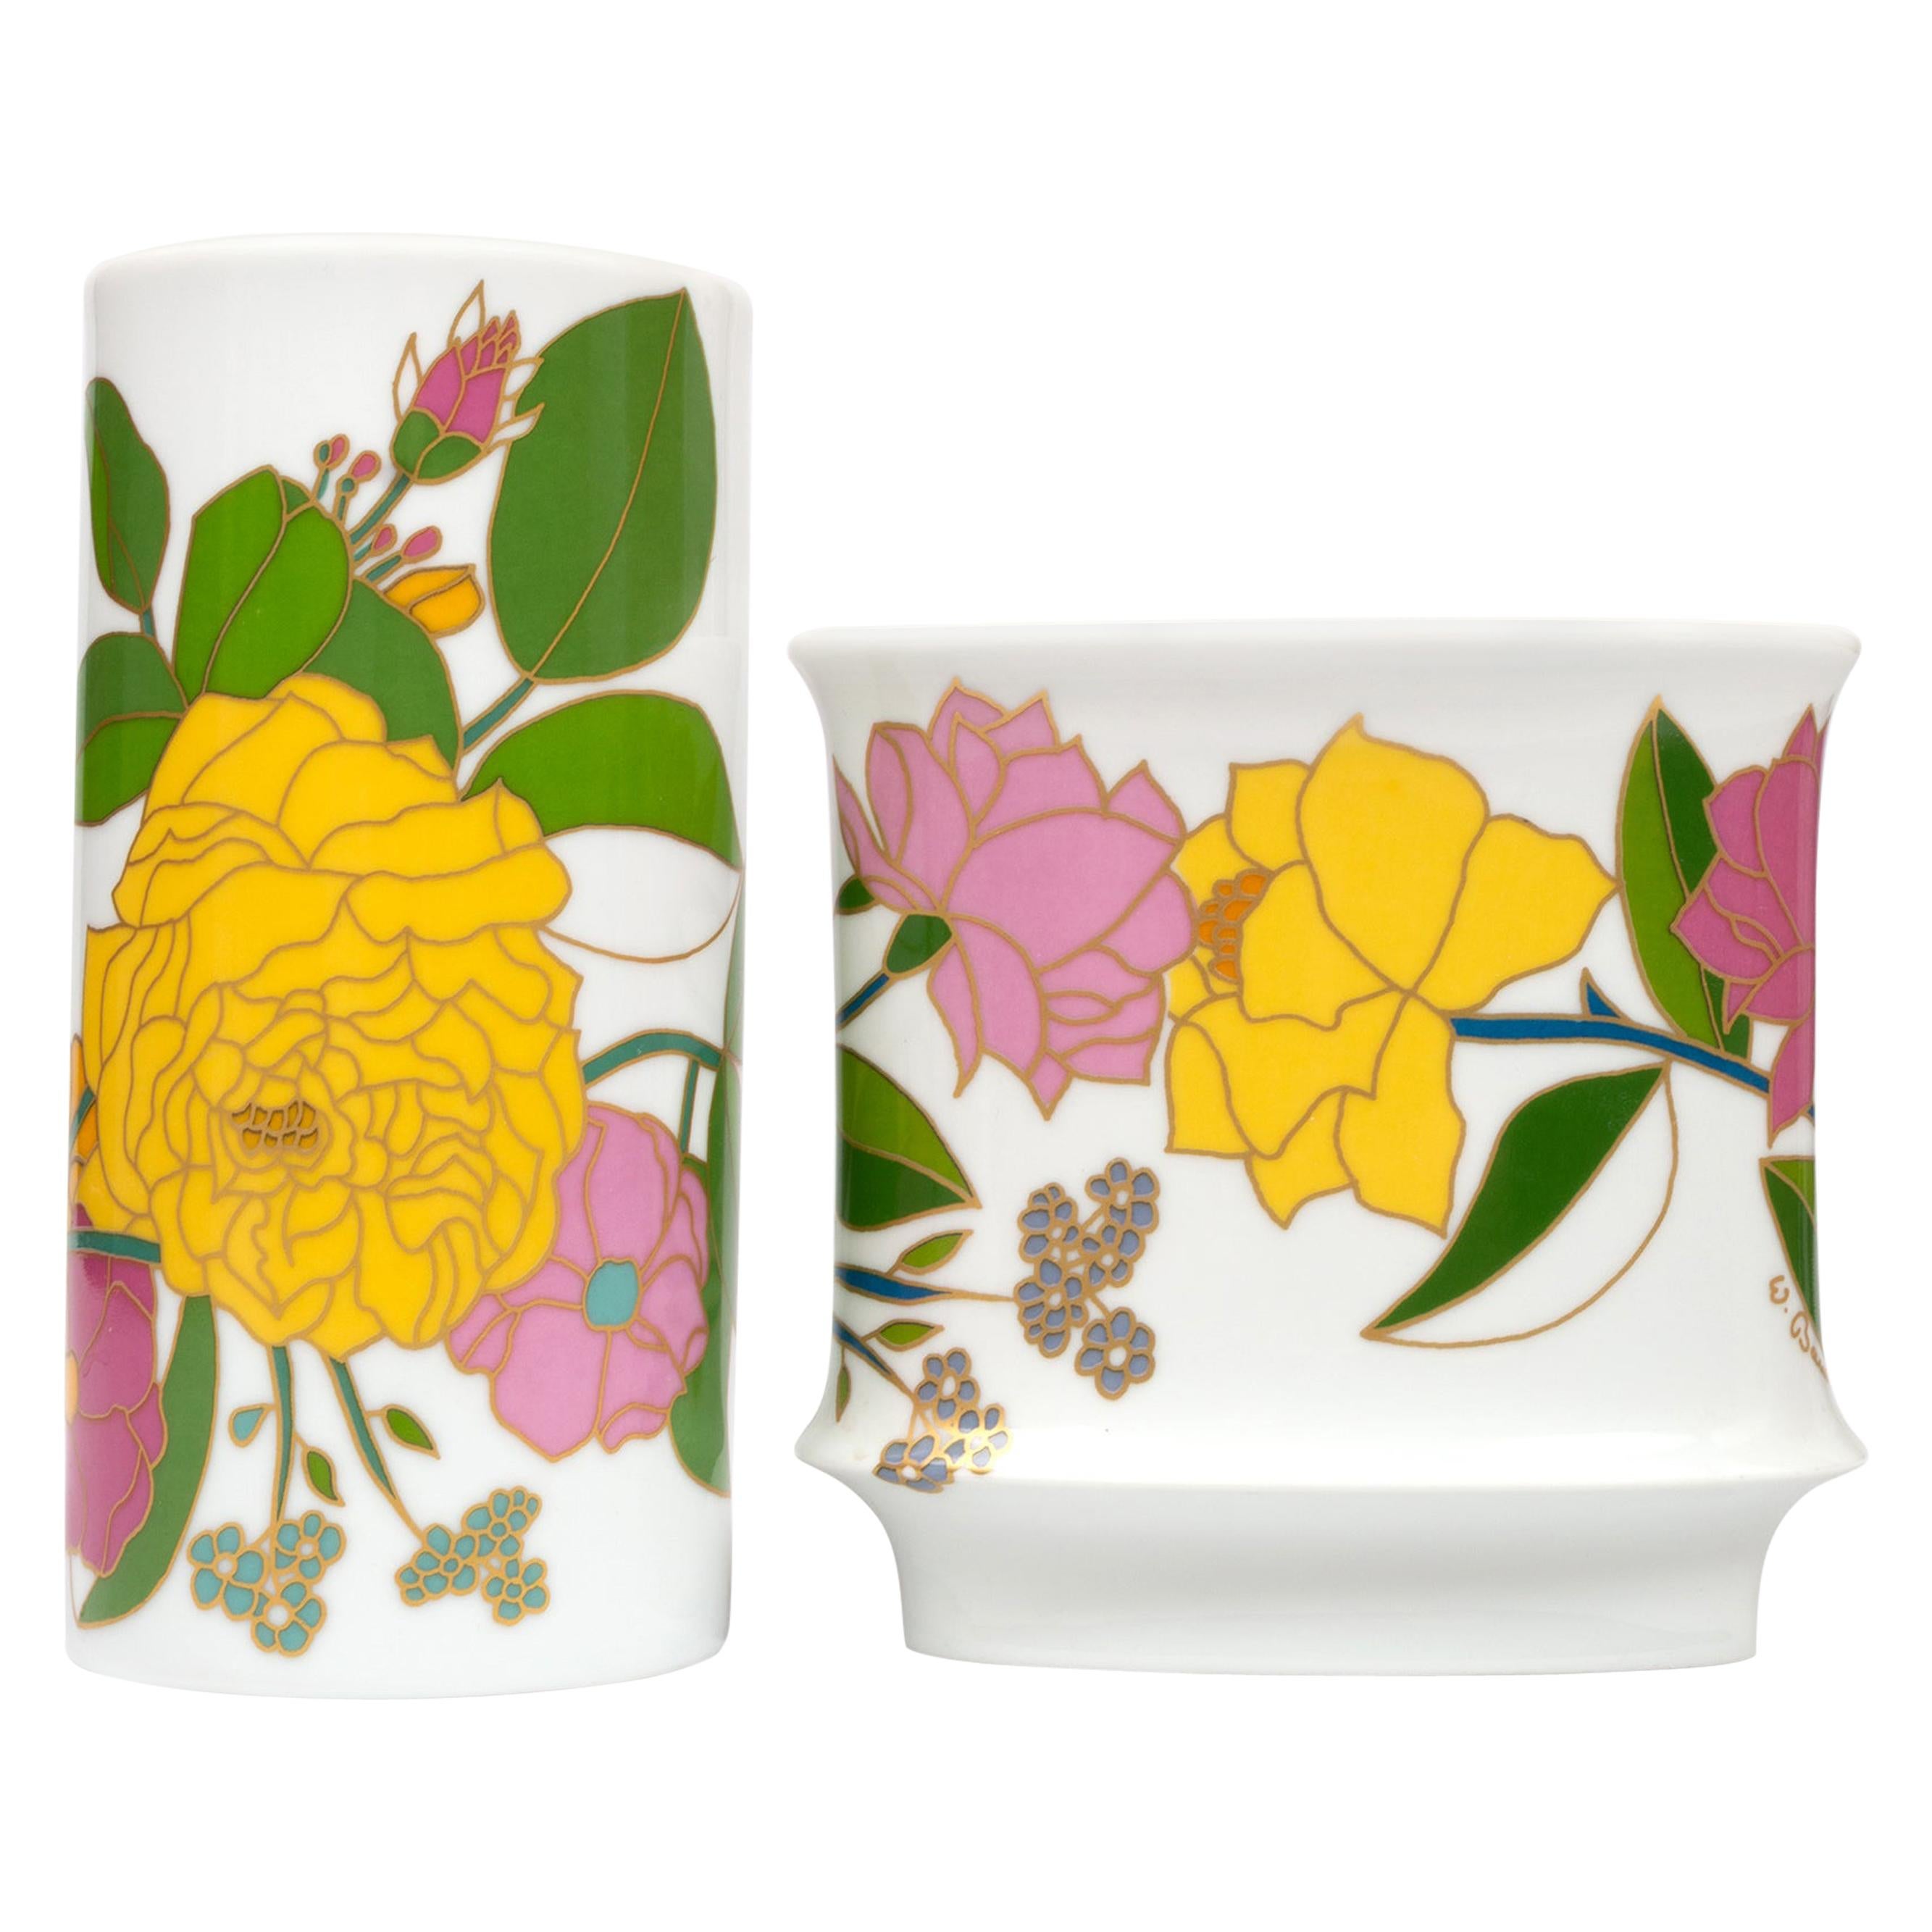 Set of 2 Porcelain Art Vases by W. Bauer for Rosenthal, Germany, circa 1970